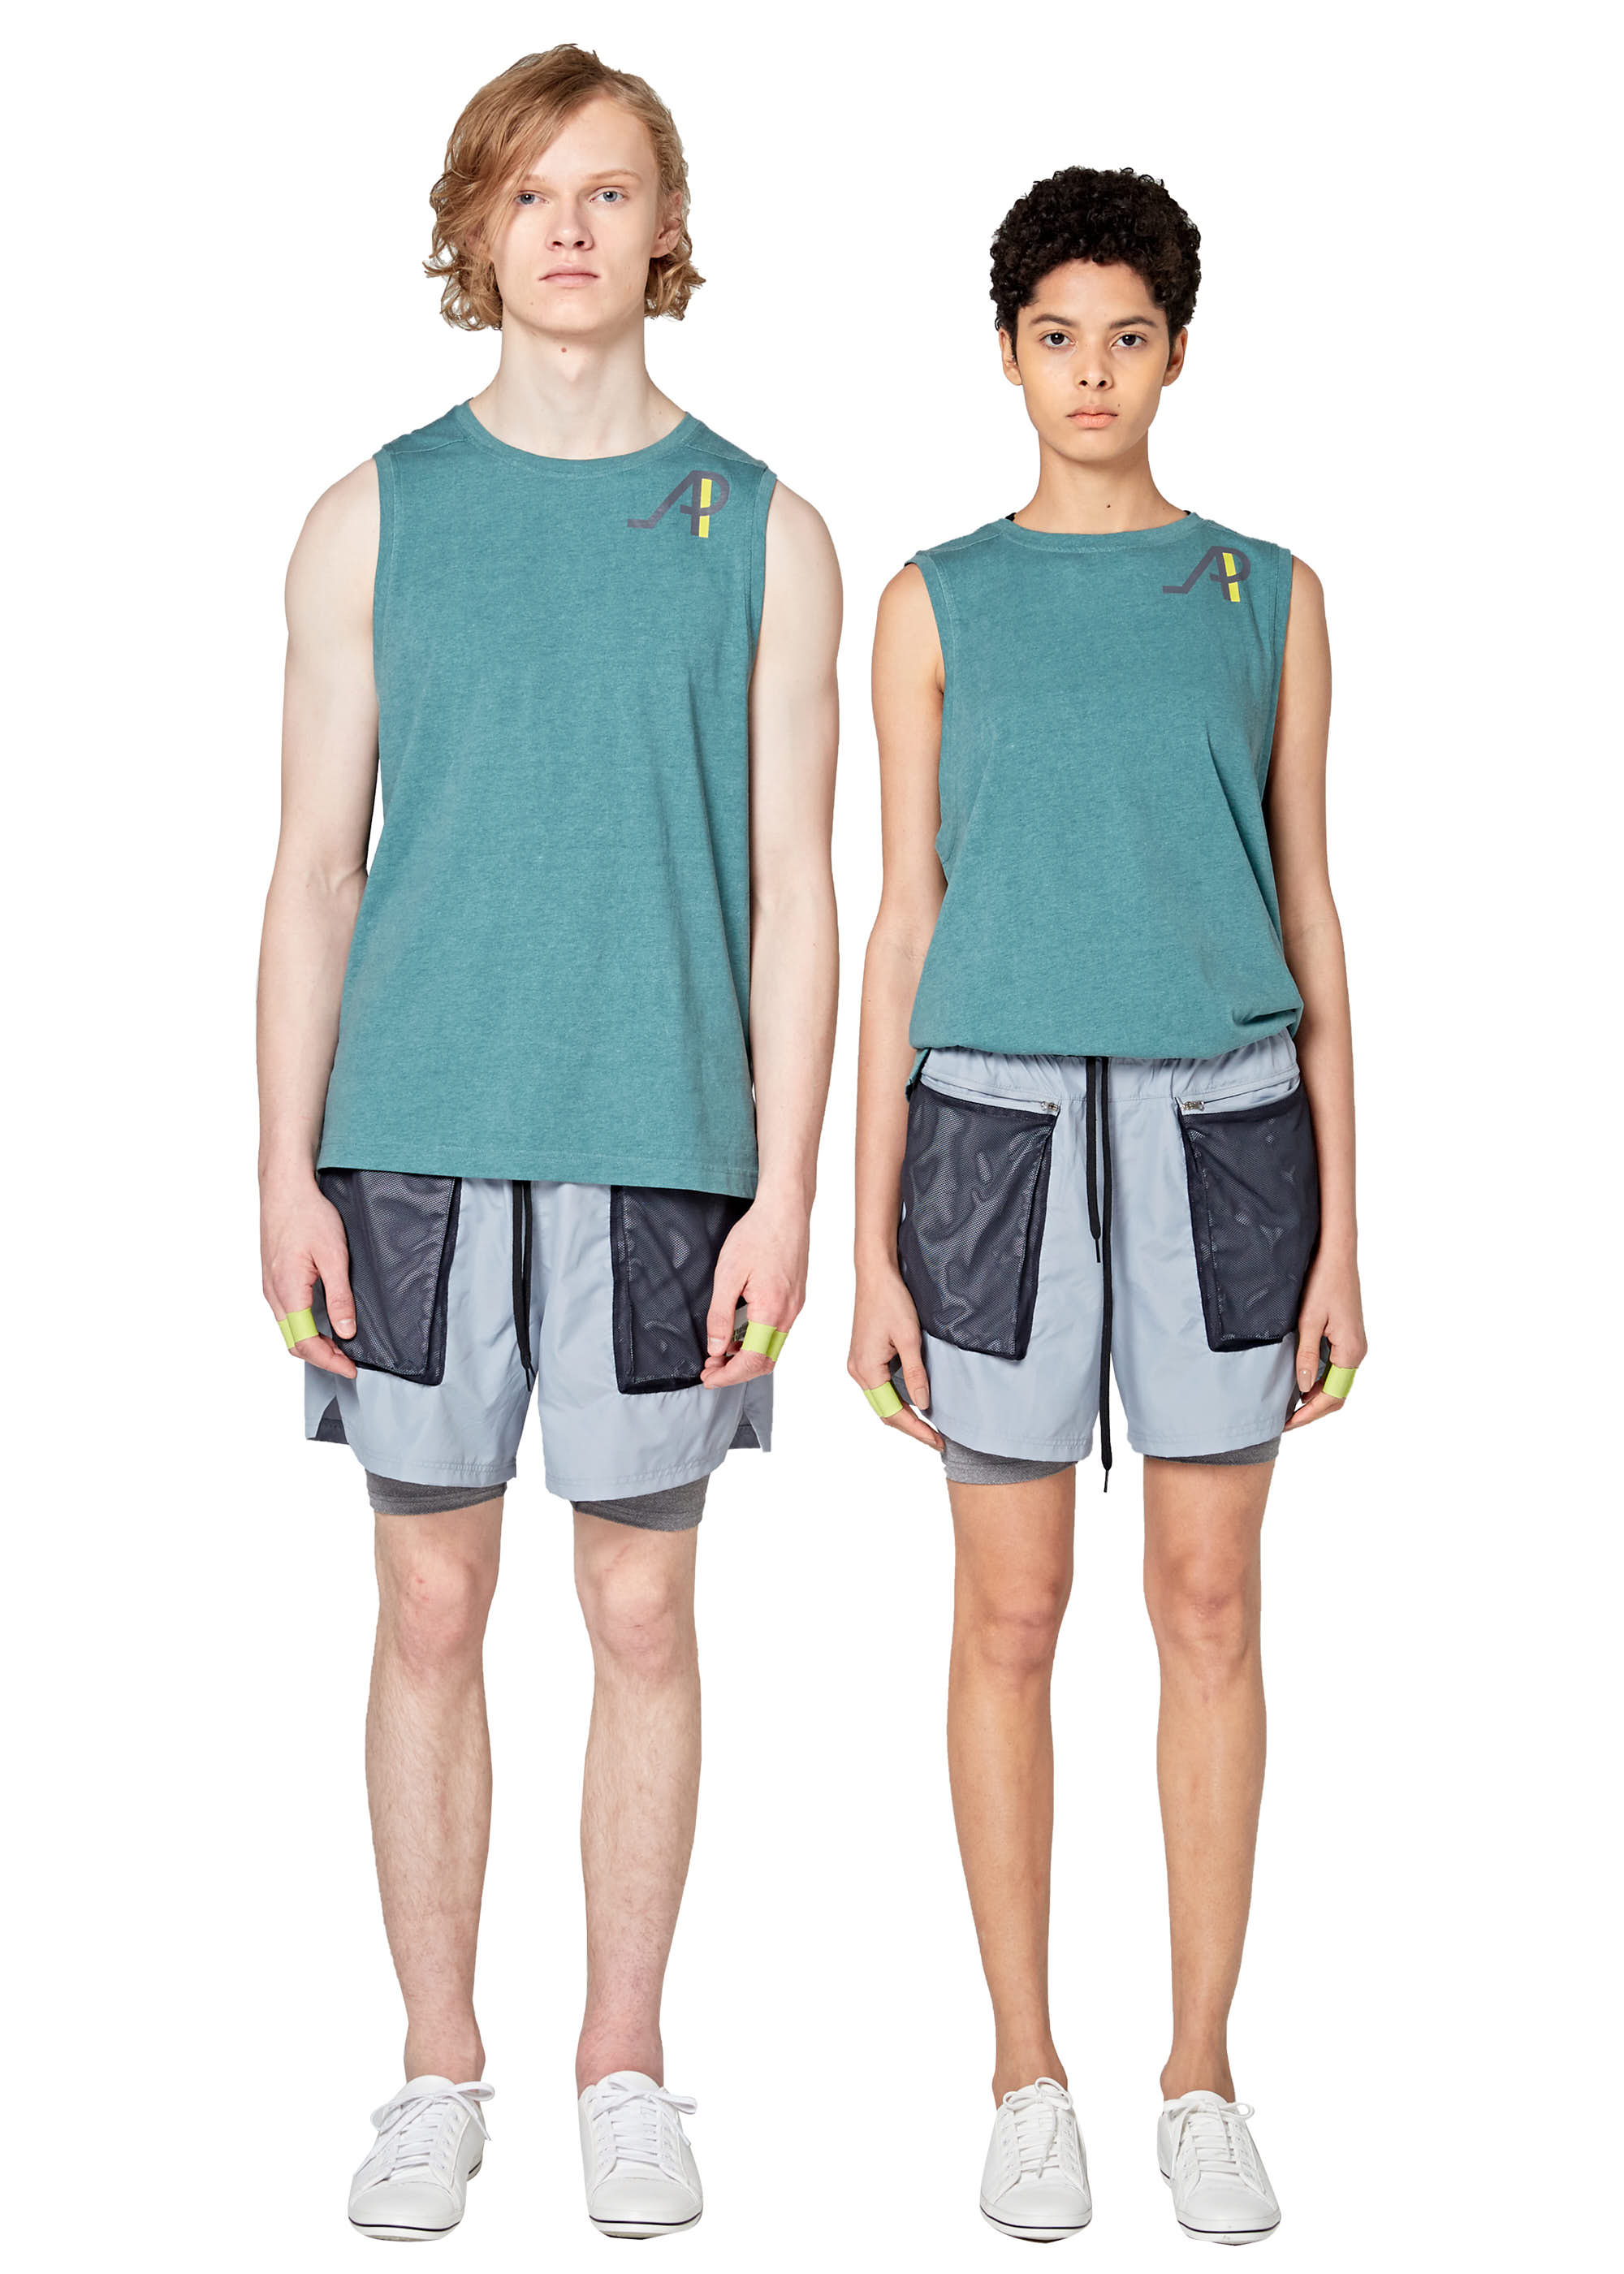 AM01PS022 in 1 BAND RUNNING SHORTS_LIGHT GREY